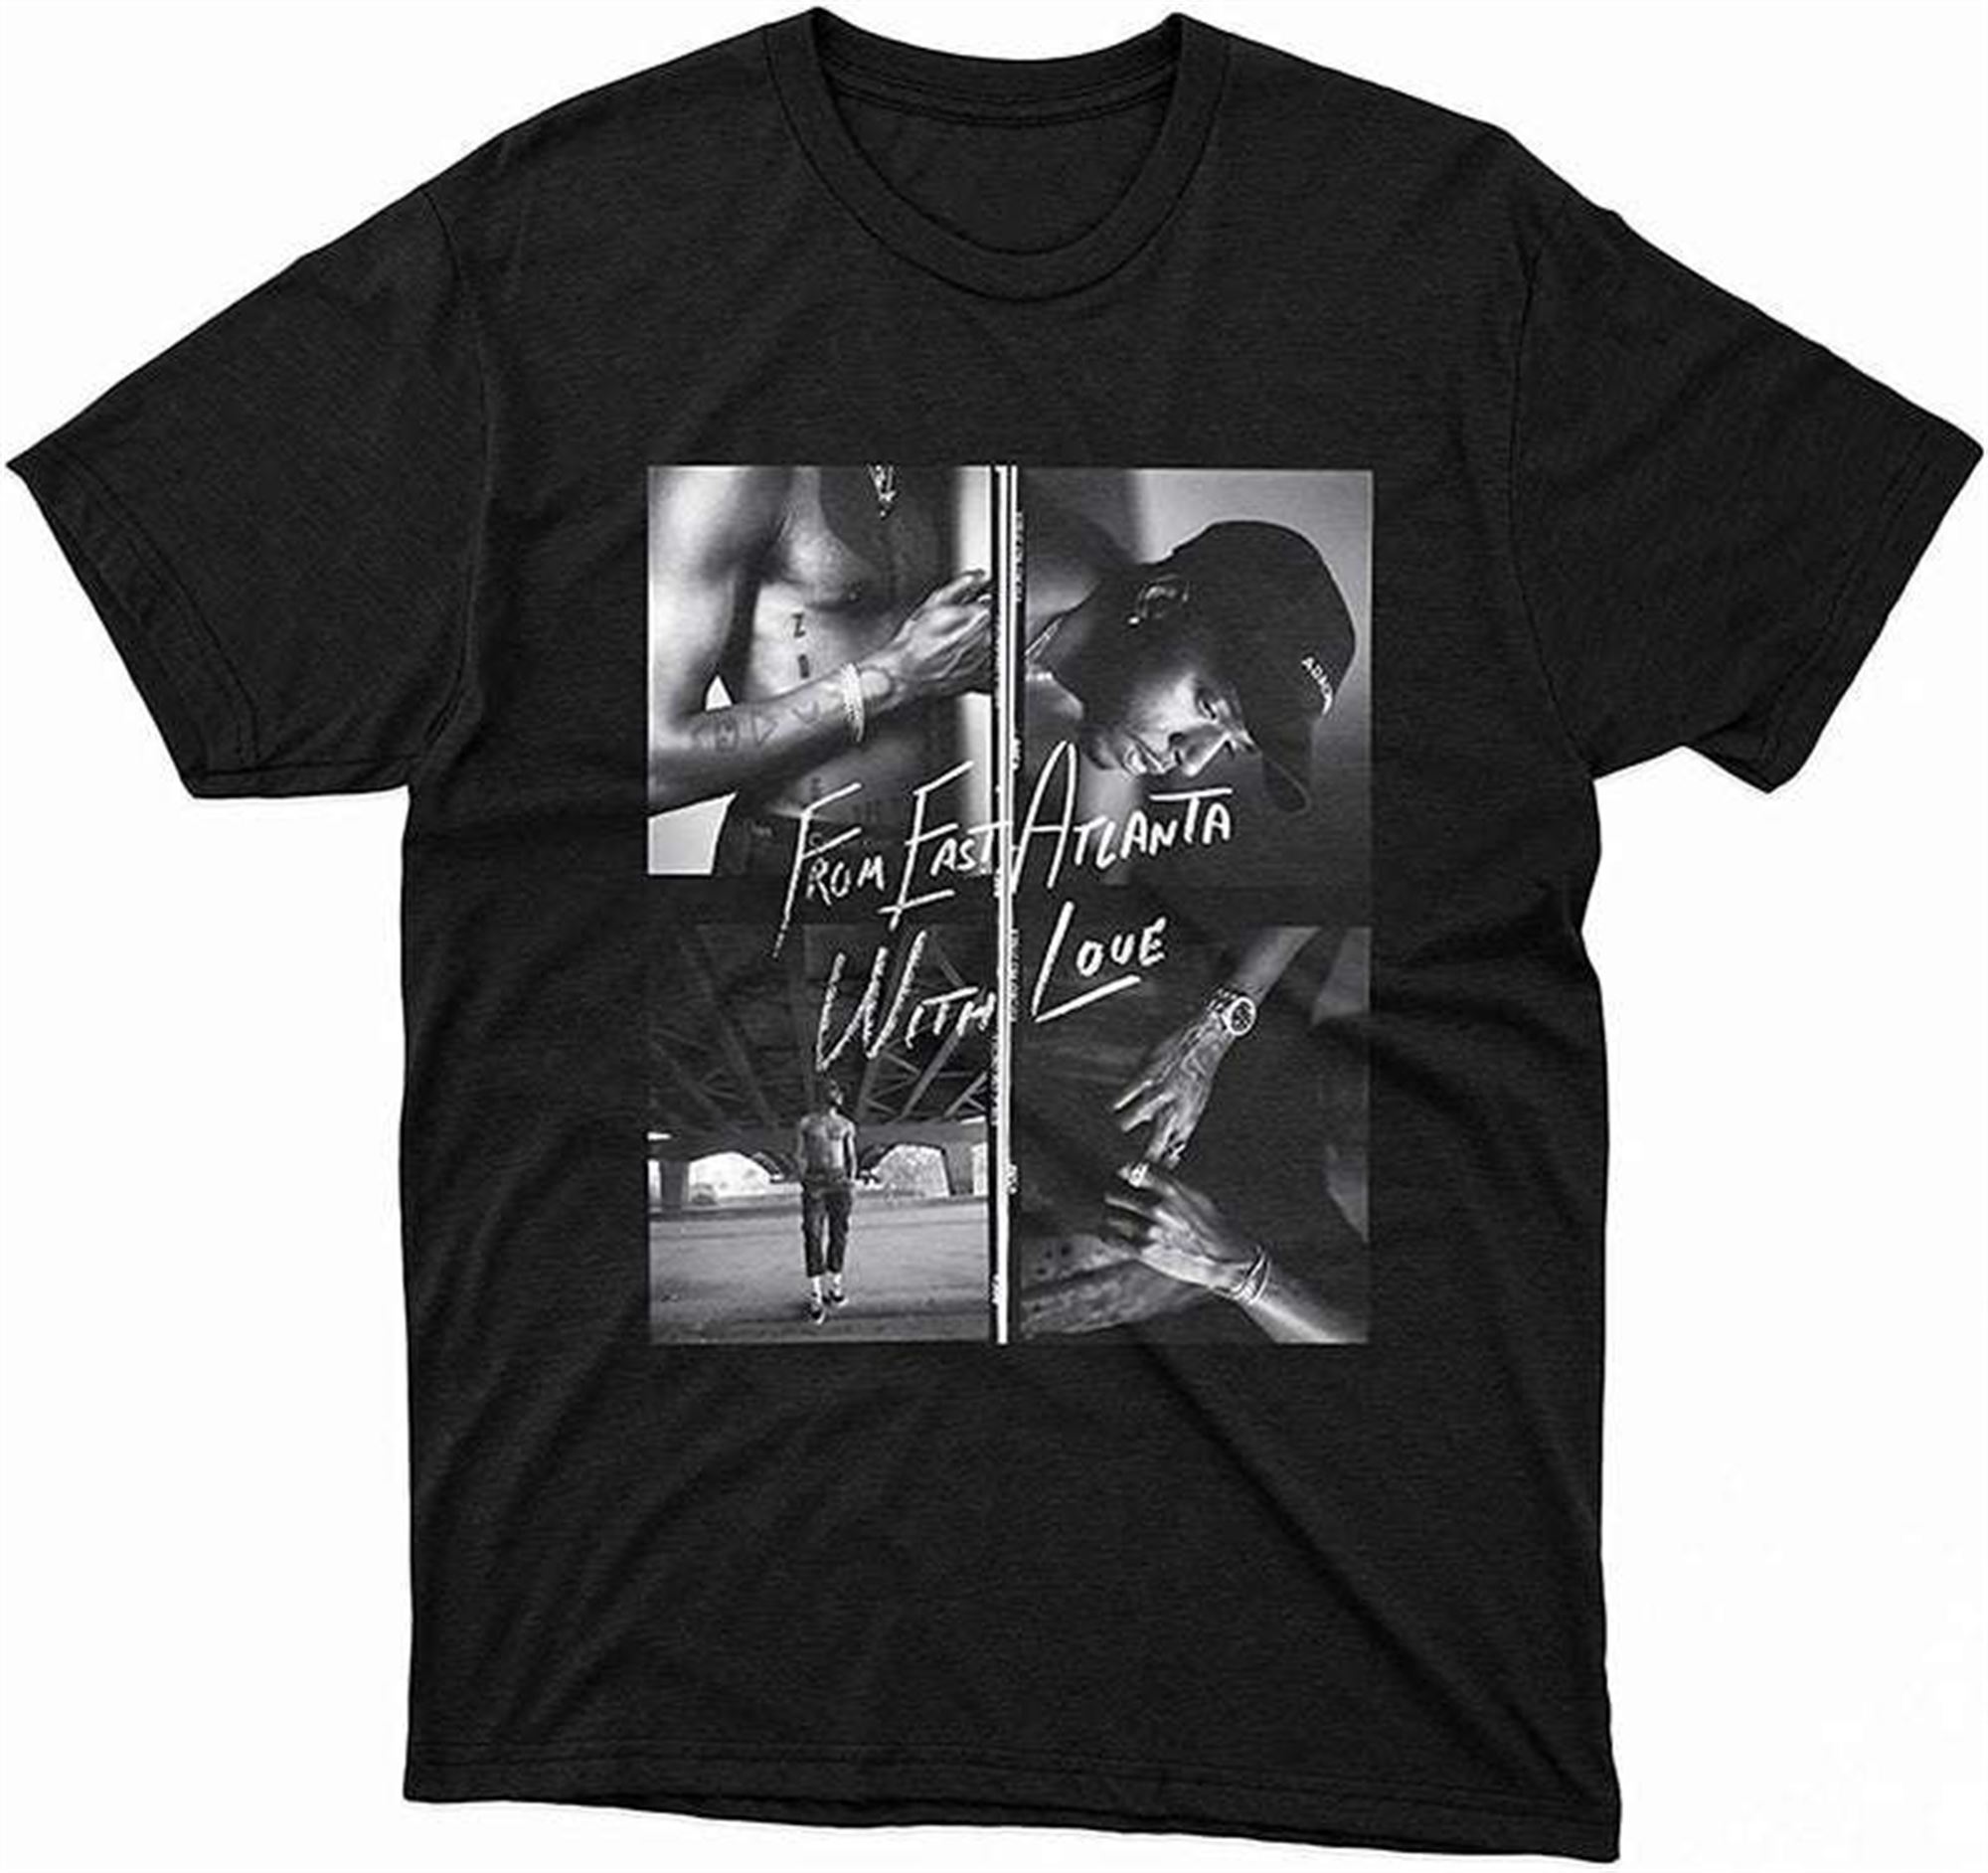 6lack Merch 6lack From Fast Atlanta With Love T-shirt Full Size Up To 5xl